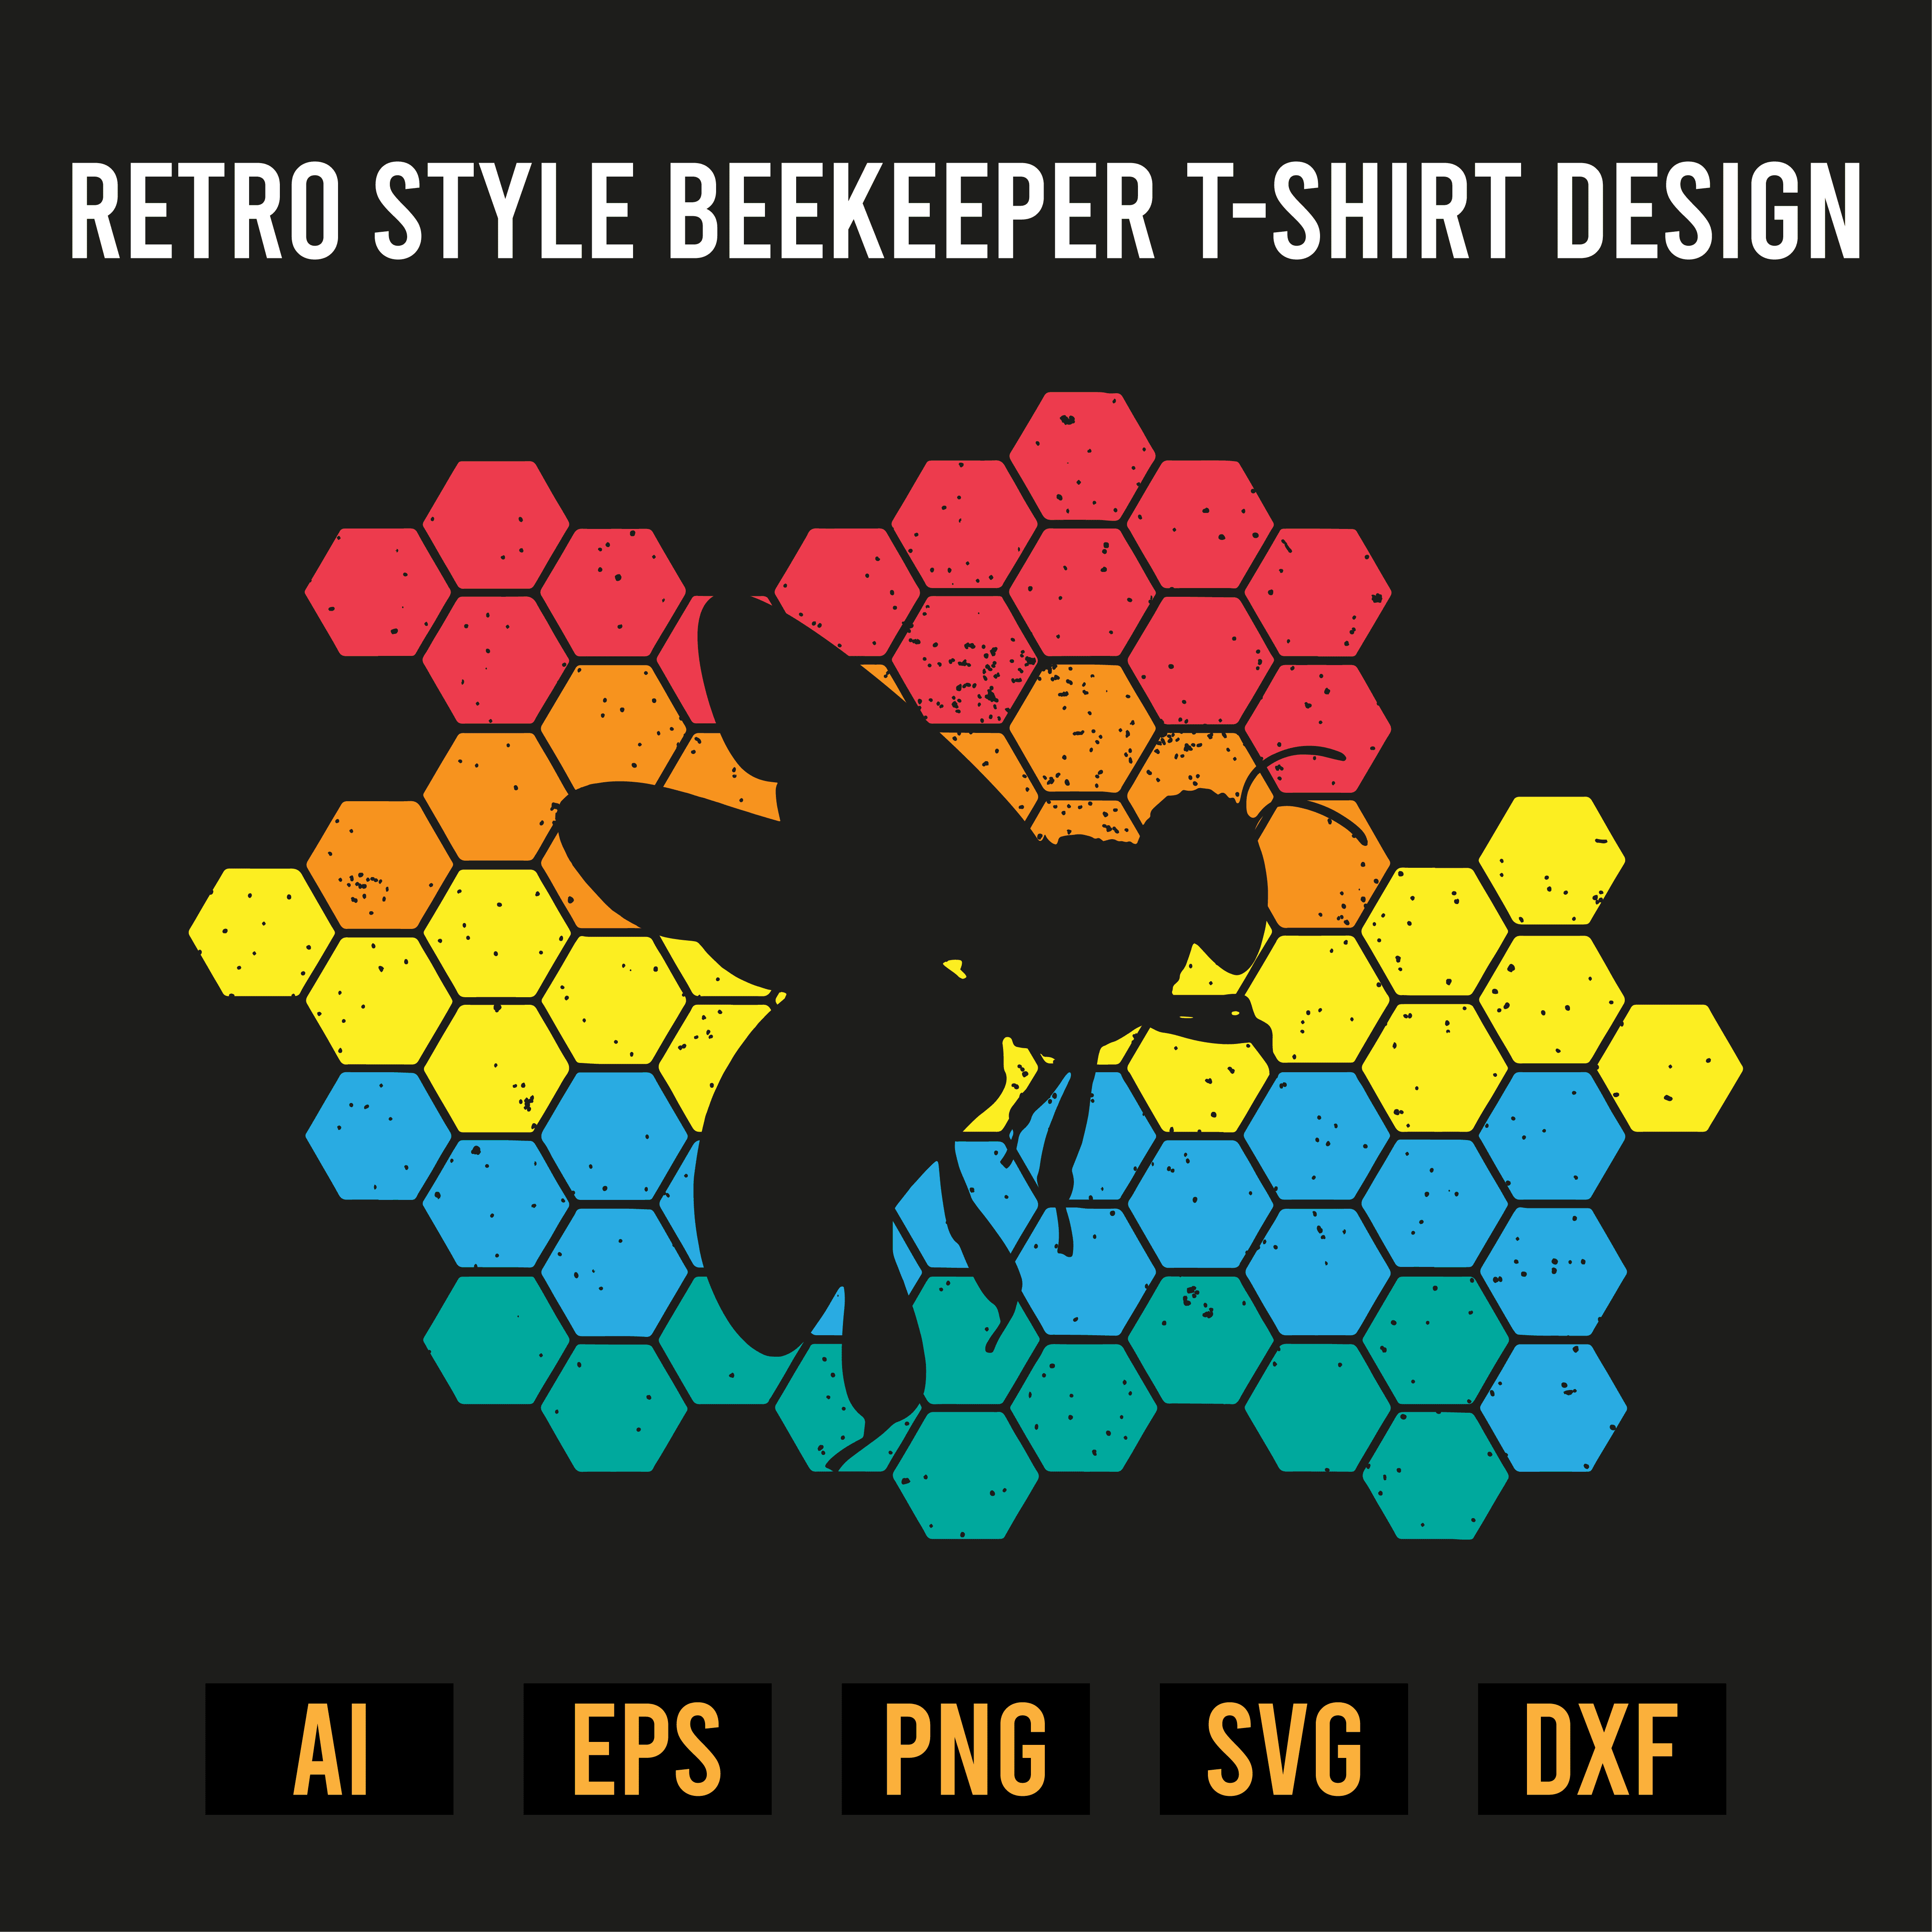 Retro Style Beekeeper T- Shirt Design cover image.